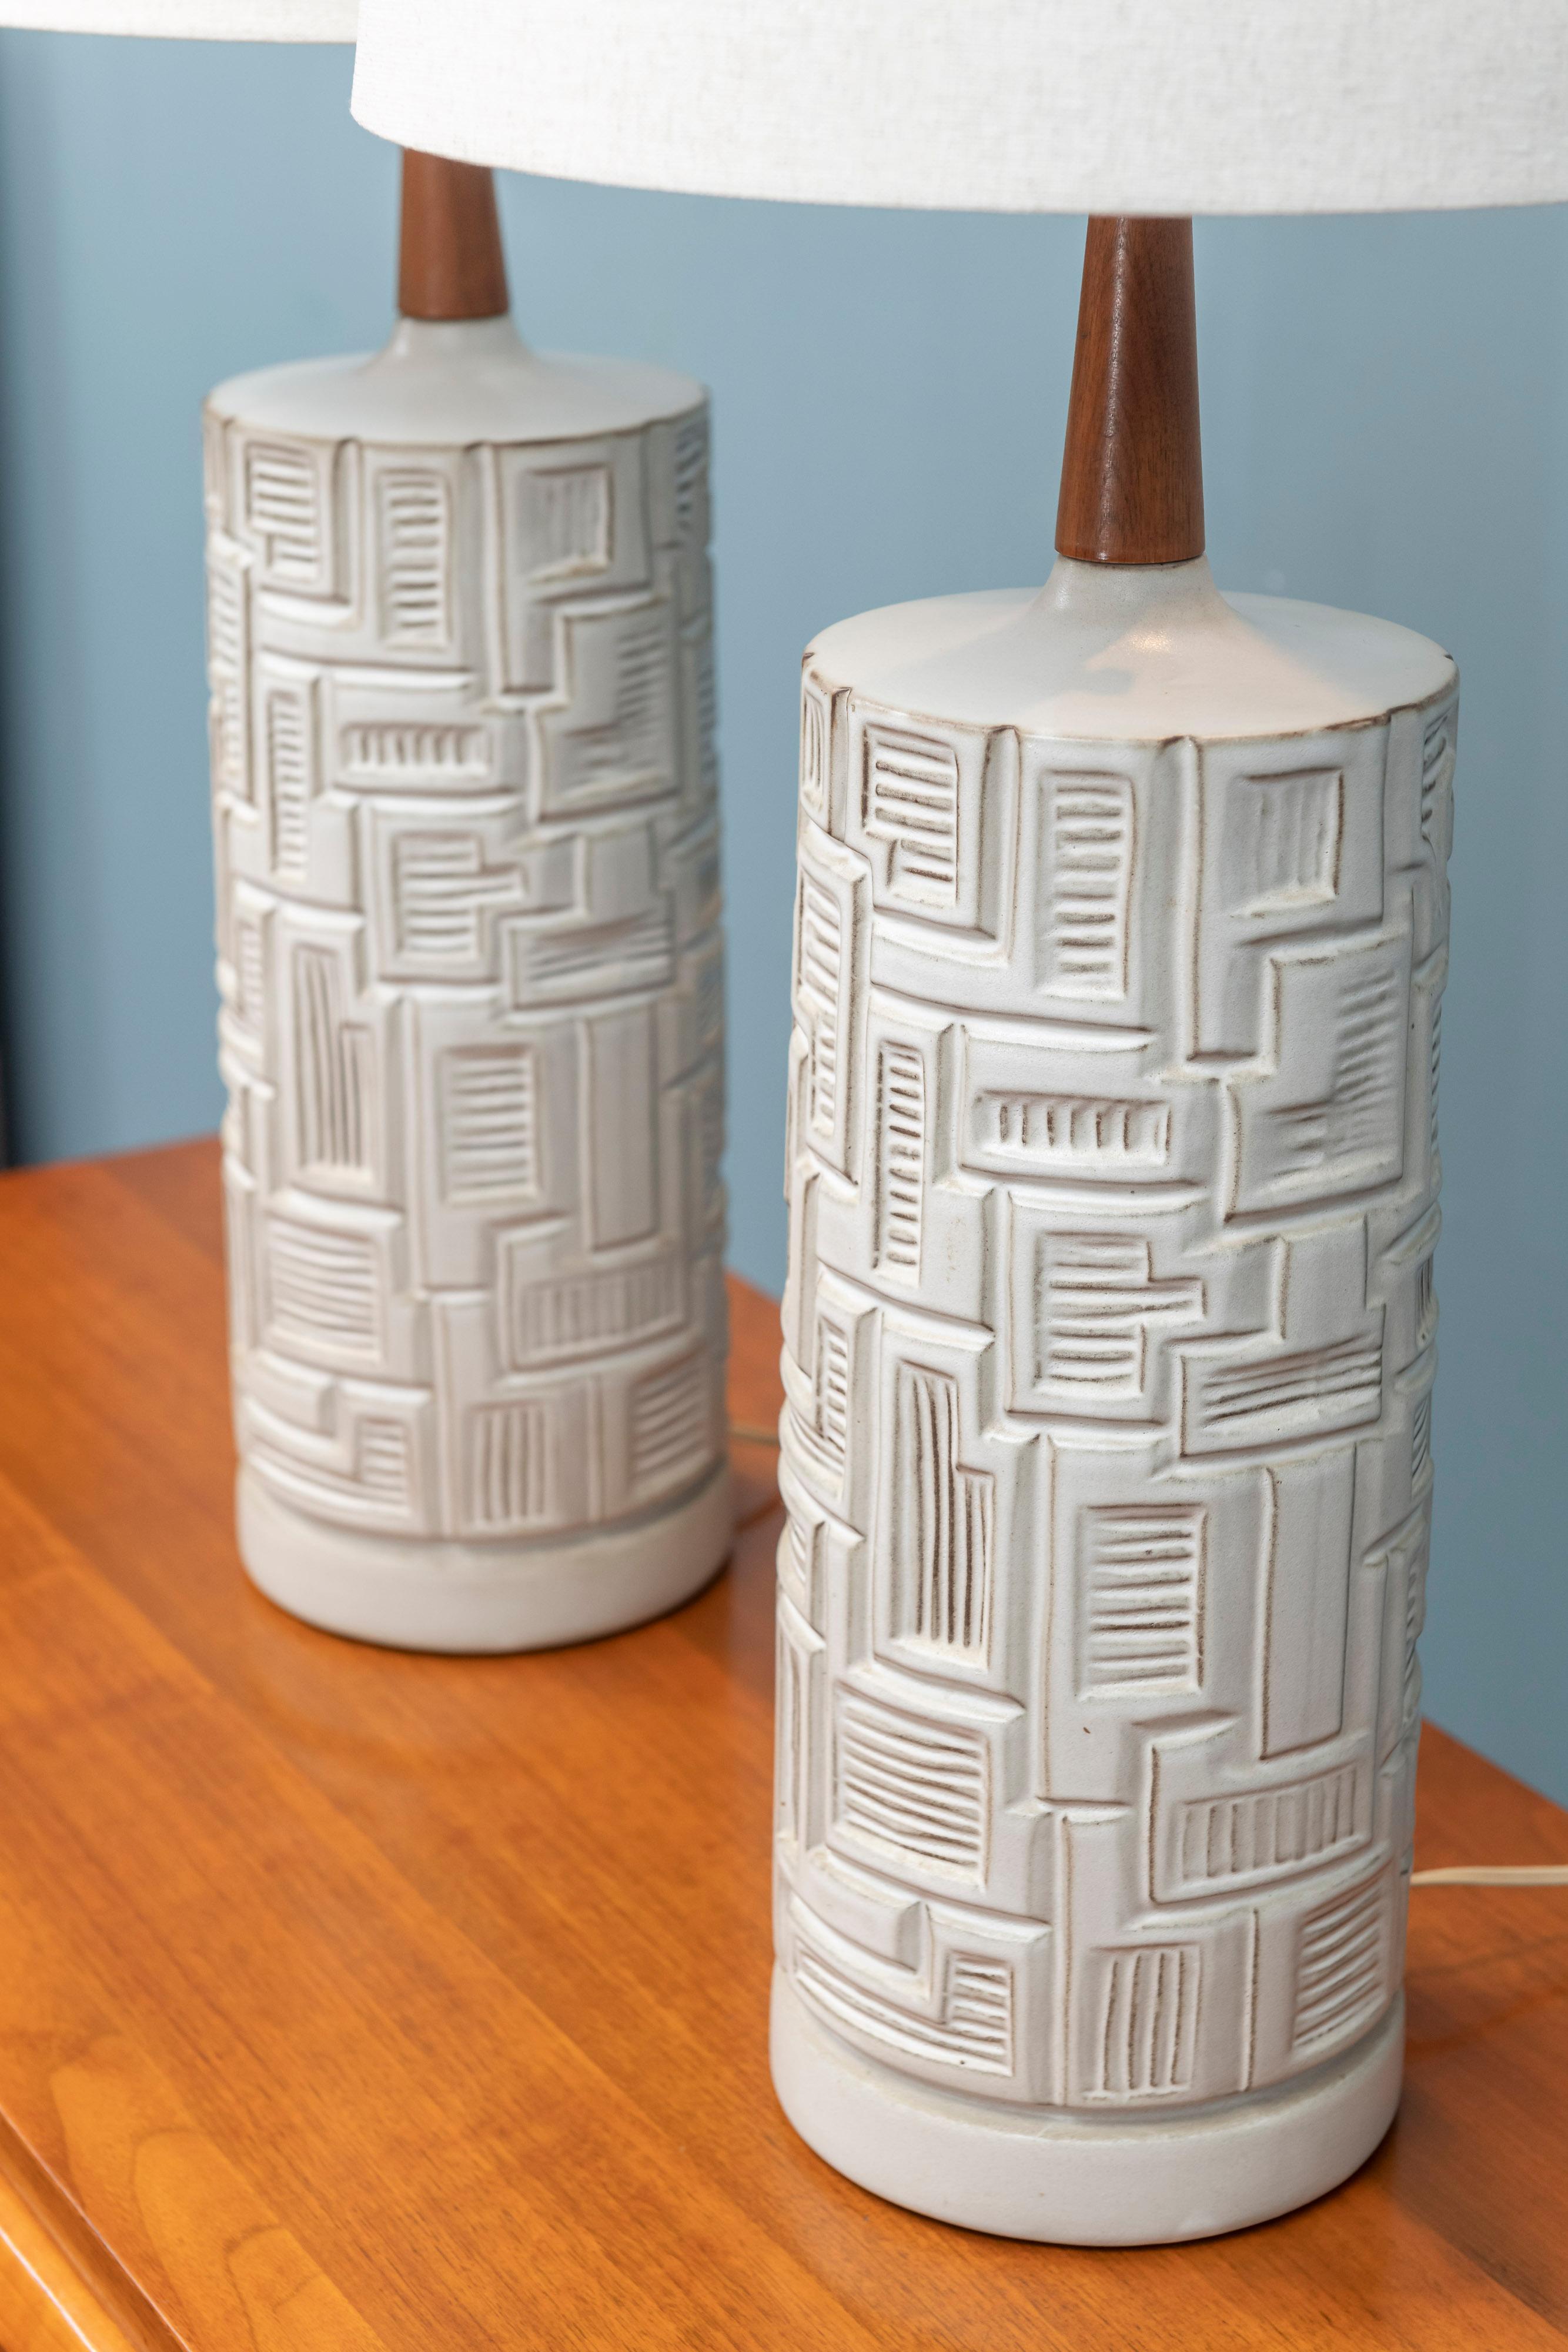 Pair of Mid-Century Modern ceramic table lamps, in very good original condition with new shades.